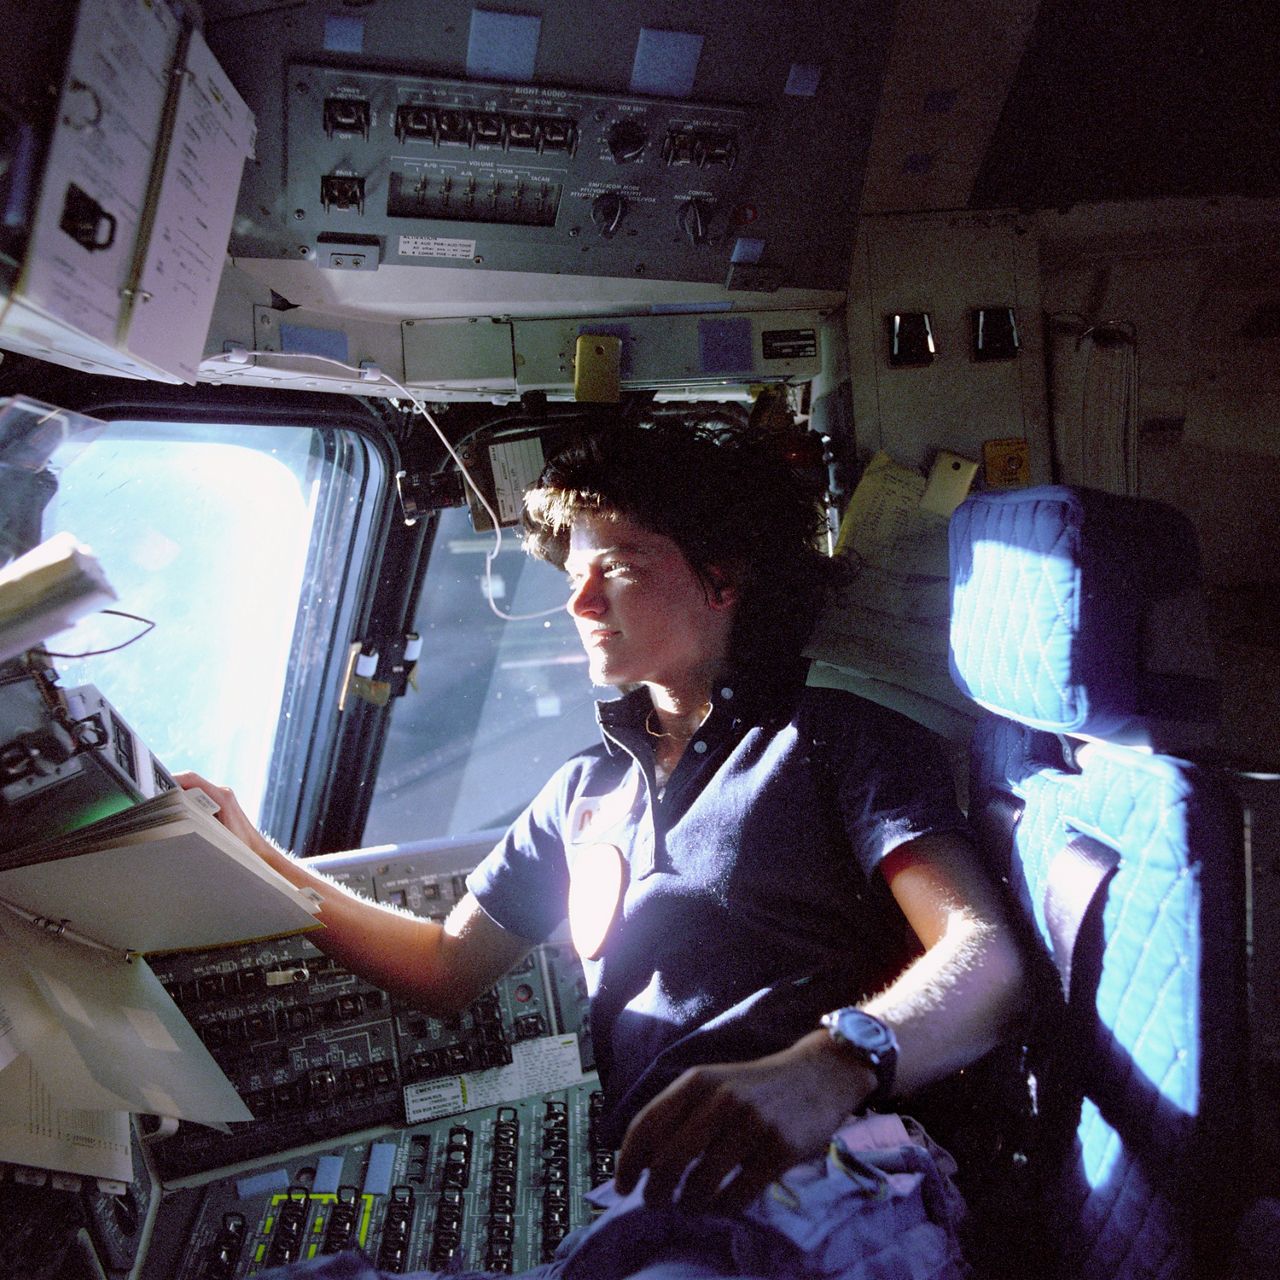 Sally Ride on the flight deck of the Space Shuttle Challenger during the STS-41-G mission in 1984.